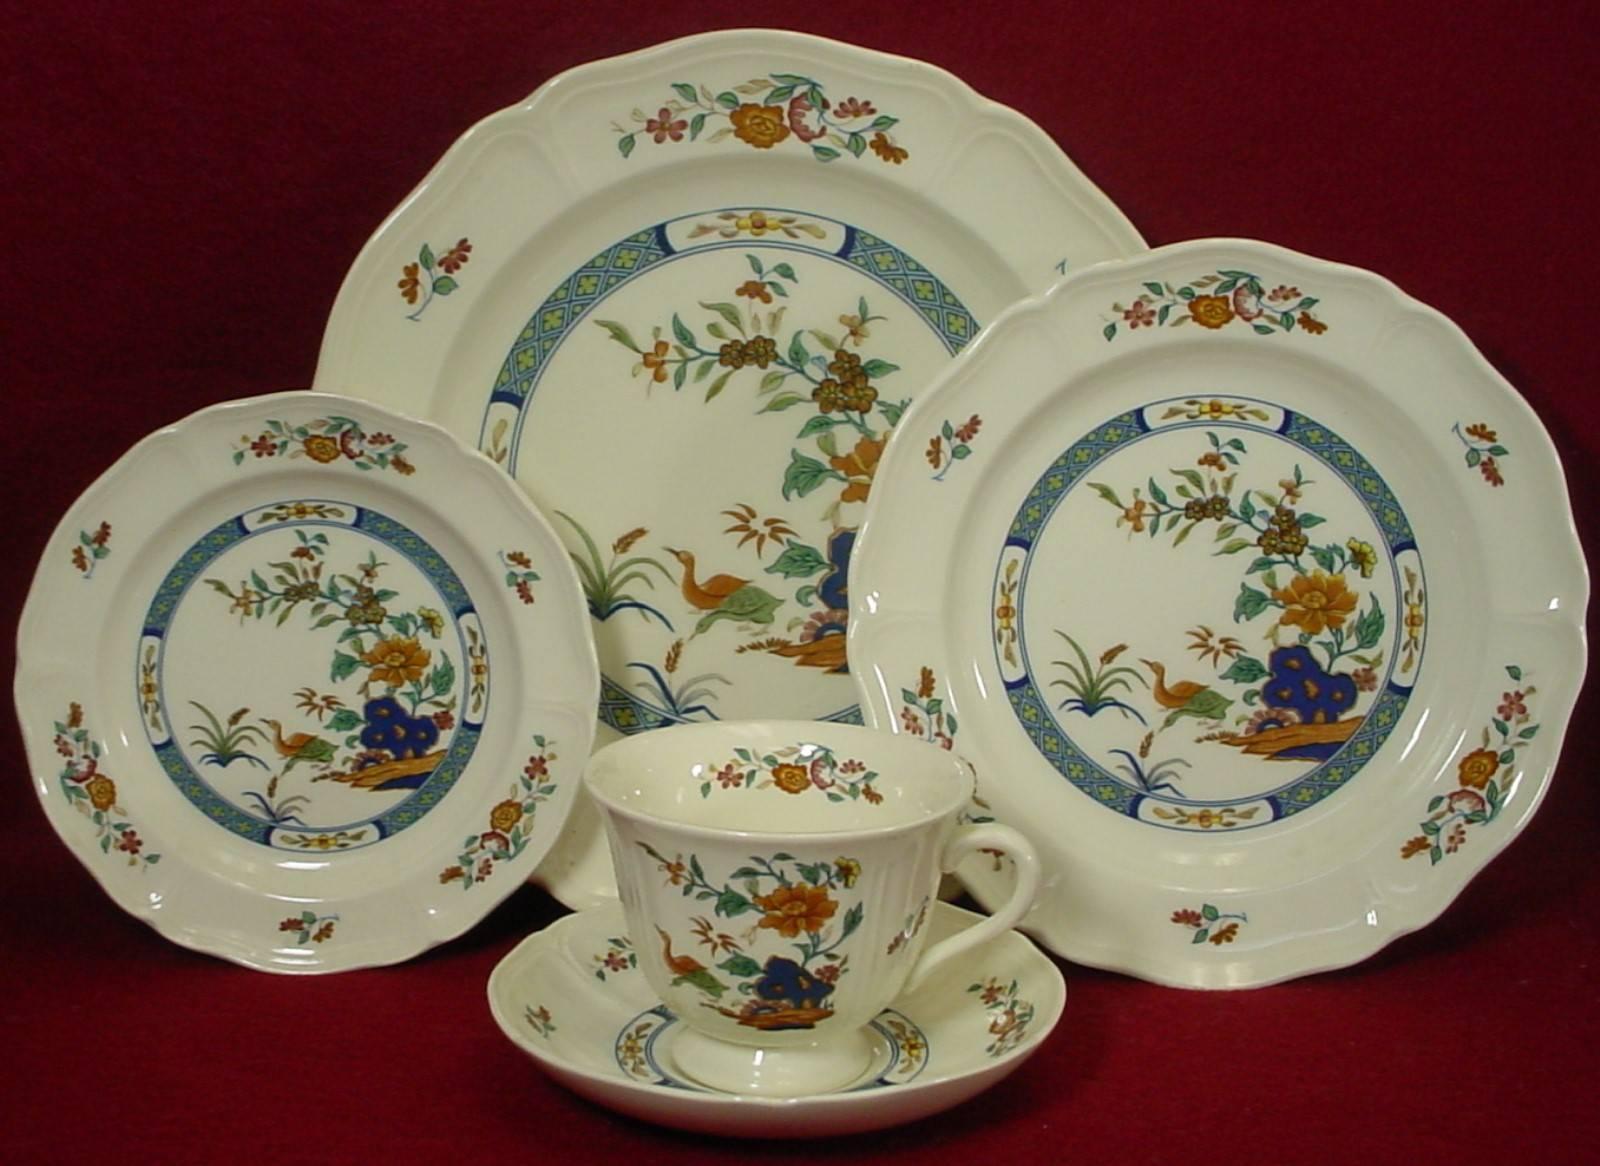 
CHINA FINDERS 

China, Crystal, Flatware and Collectible Matching Service is offering ONE (1) 

WEDGWOOD china CHINESE TEAL pattern 20-piece SET SERVICE for 4

in great condition free from chips, cracks, break or stain and show minimal